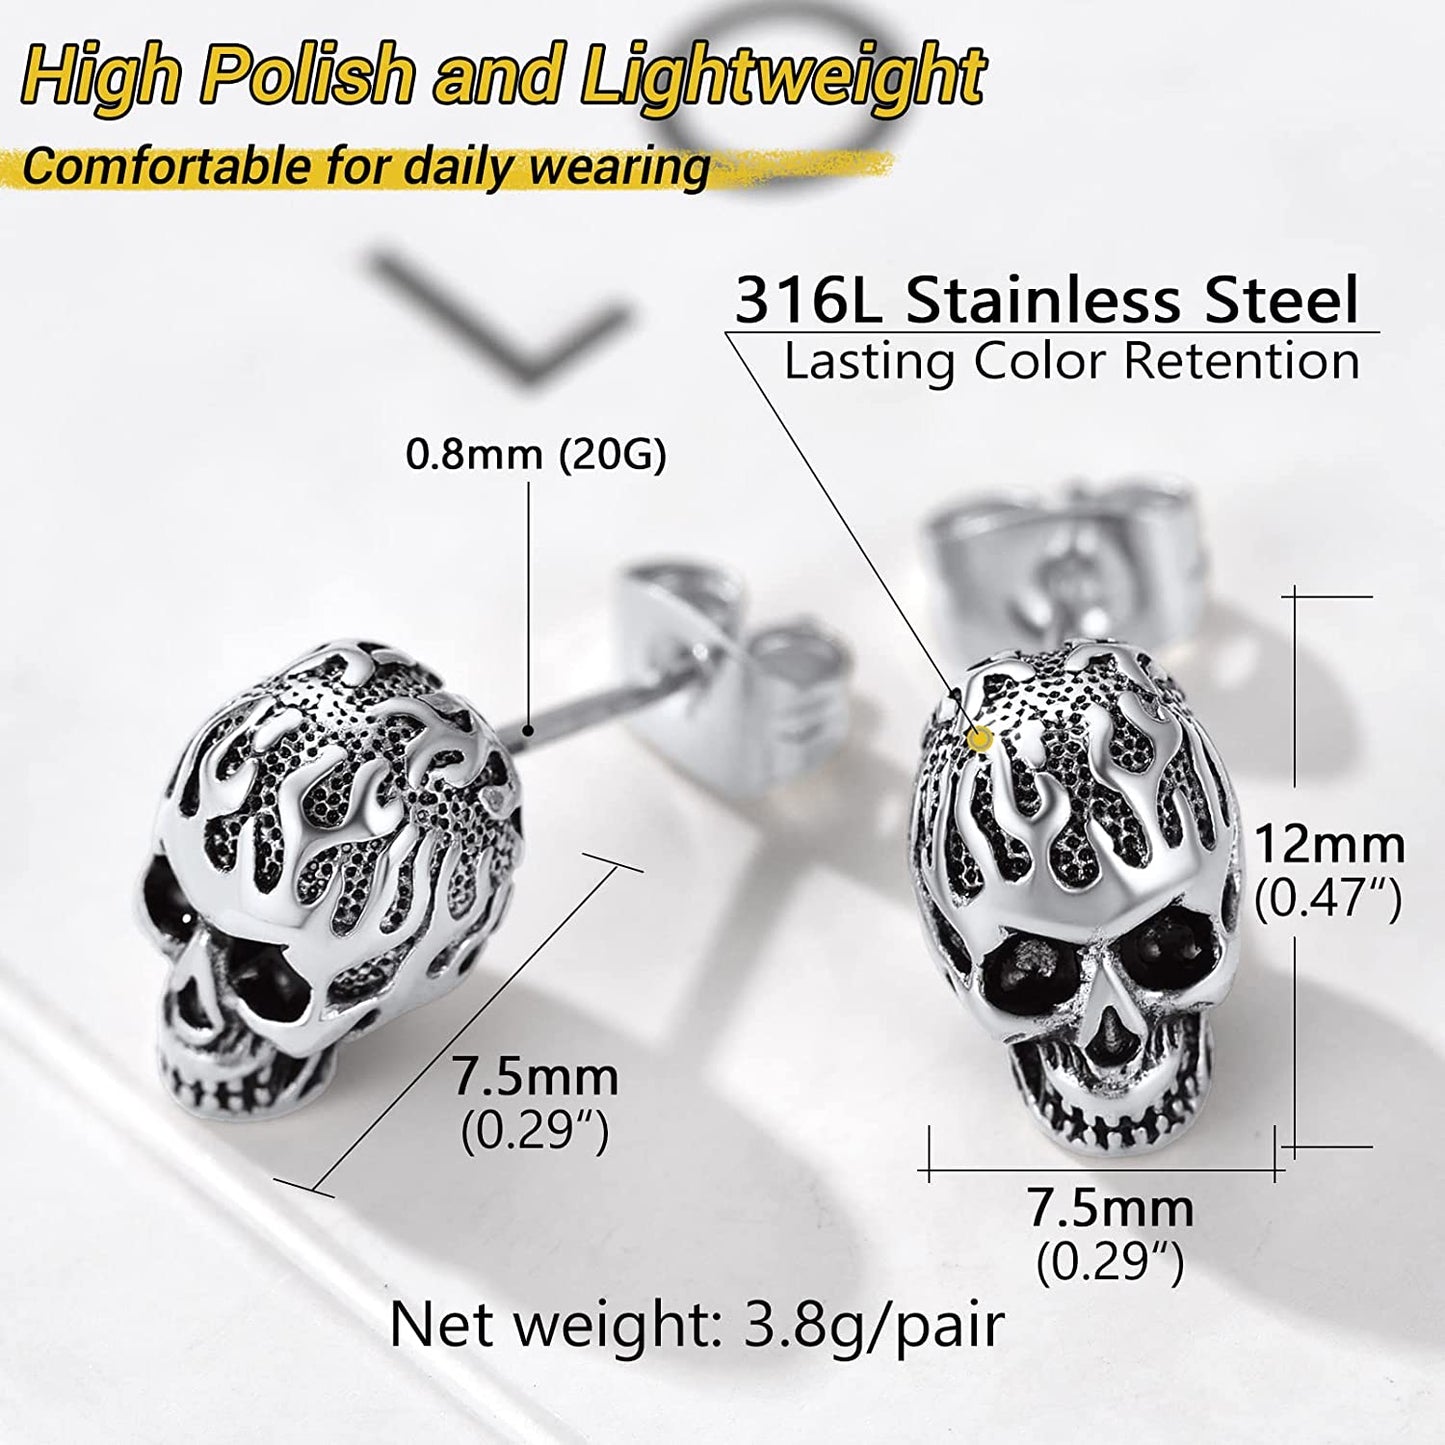 Skull Stud Earrings - Vintage Gothic Stainless Steel Grunge Punk Jewelry for Men and Women